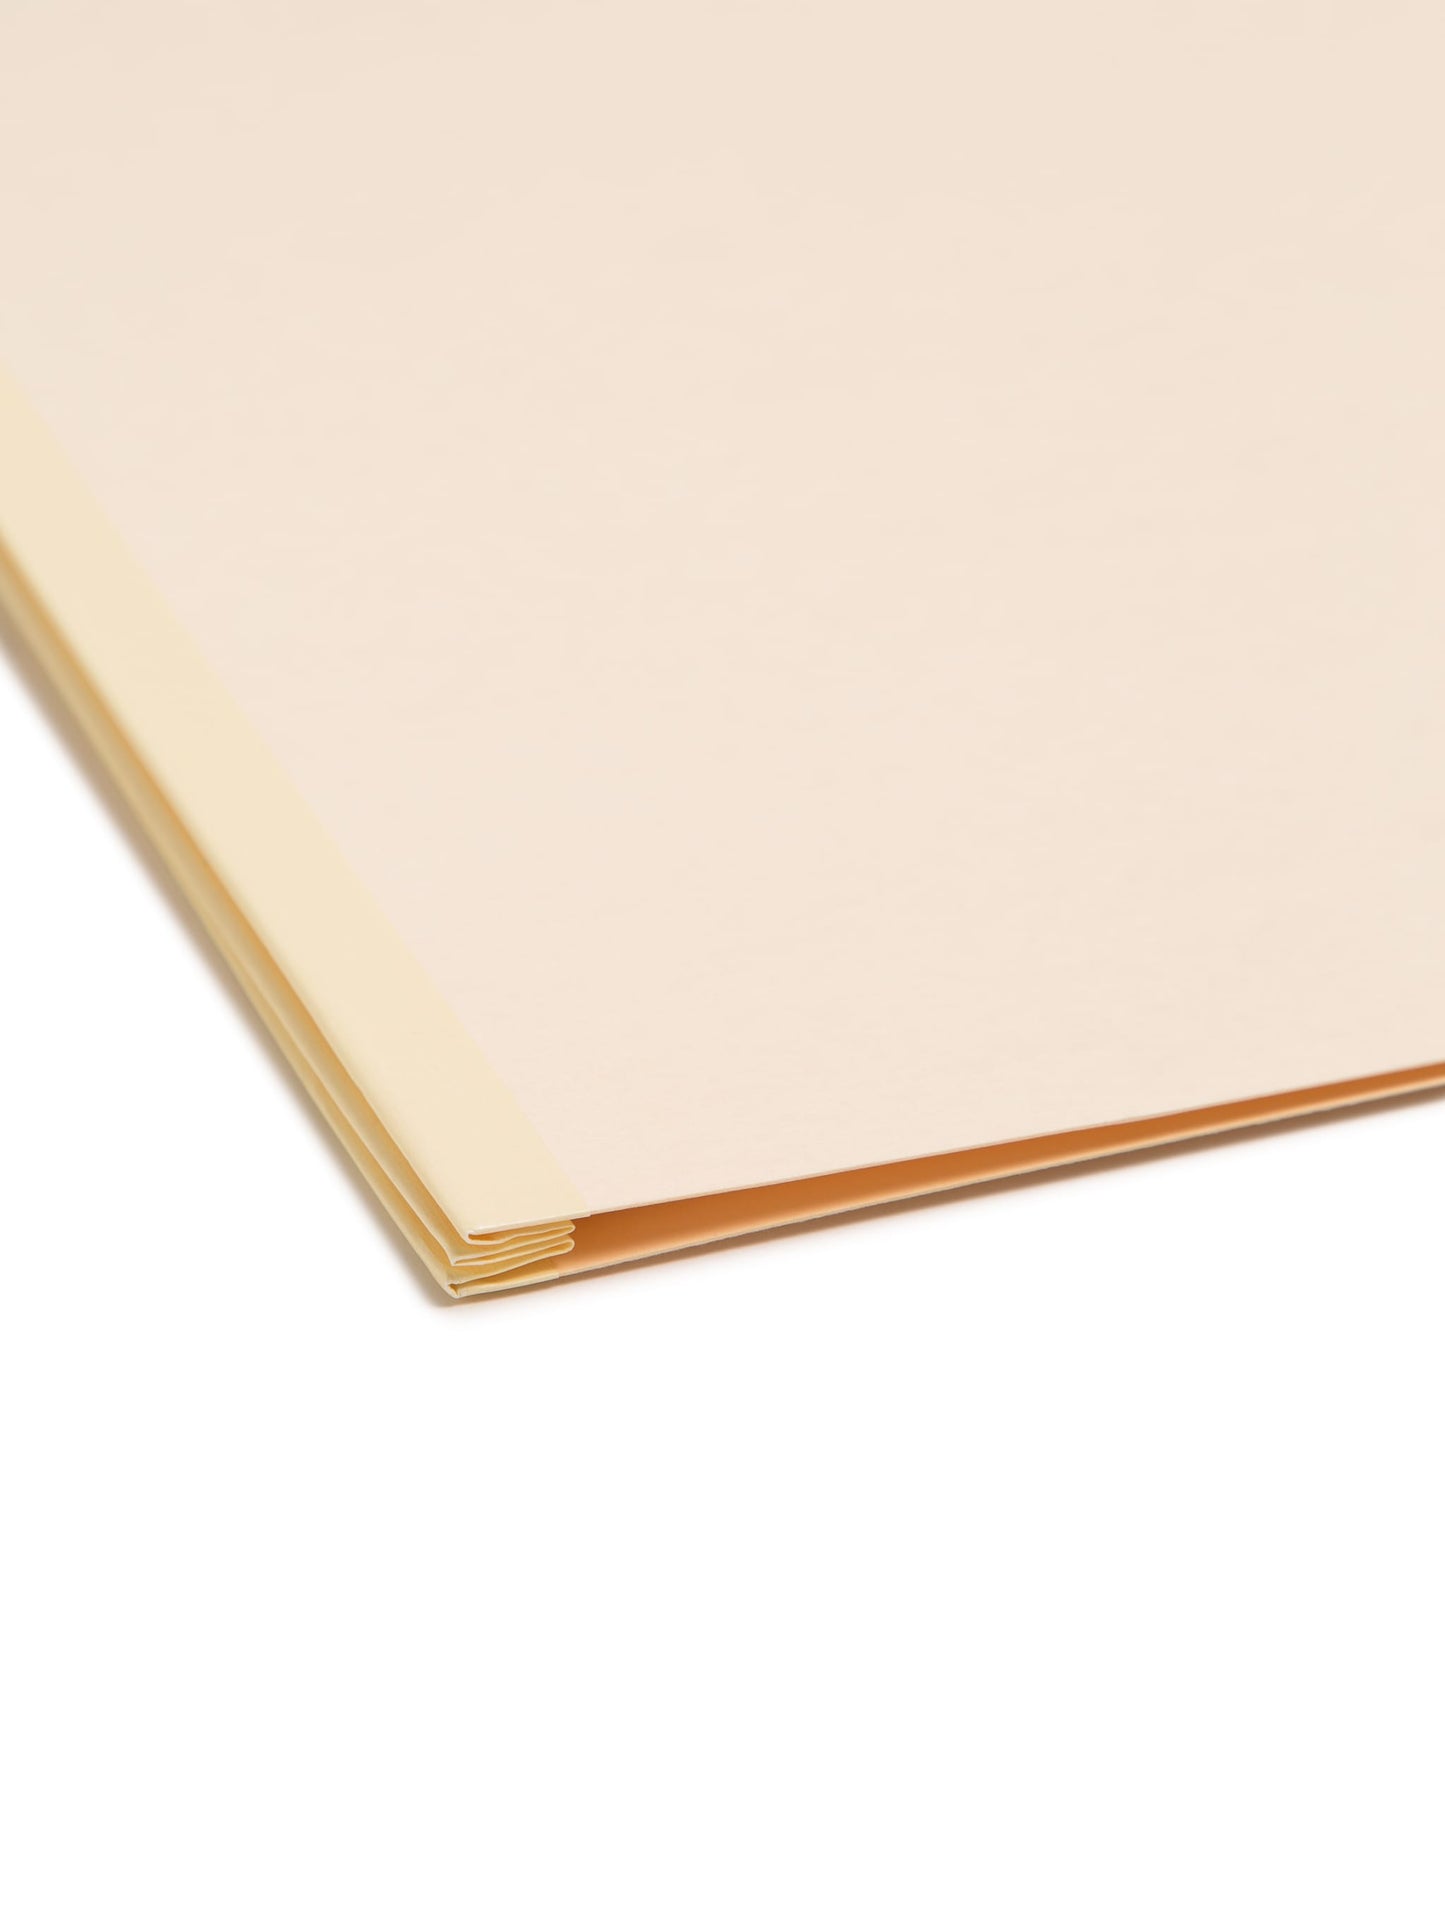 Classification File Folders, 2 Dividers, 2 inch Expansion, Manila Color, Legal Size, Set of 0, 30086486190009